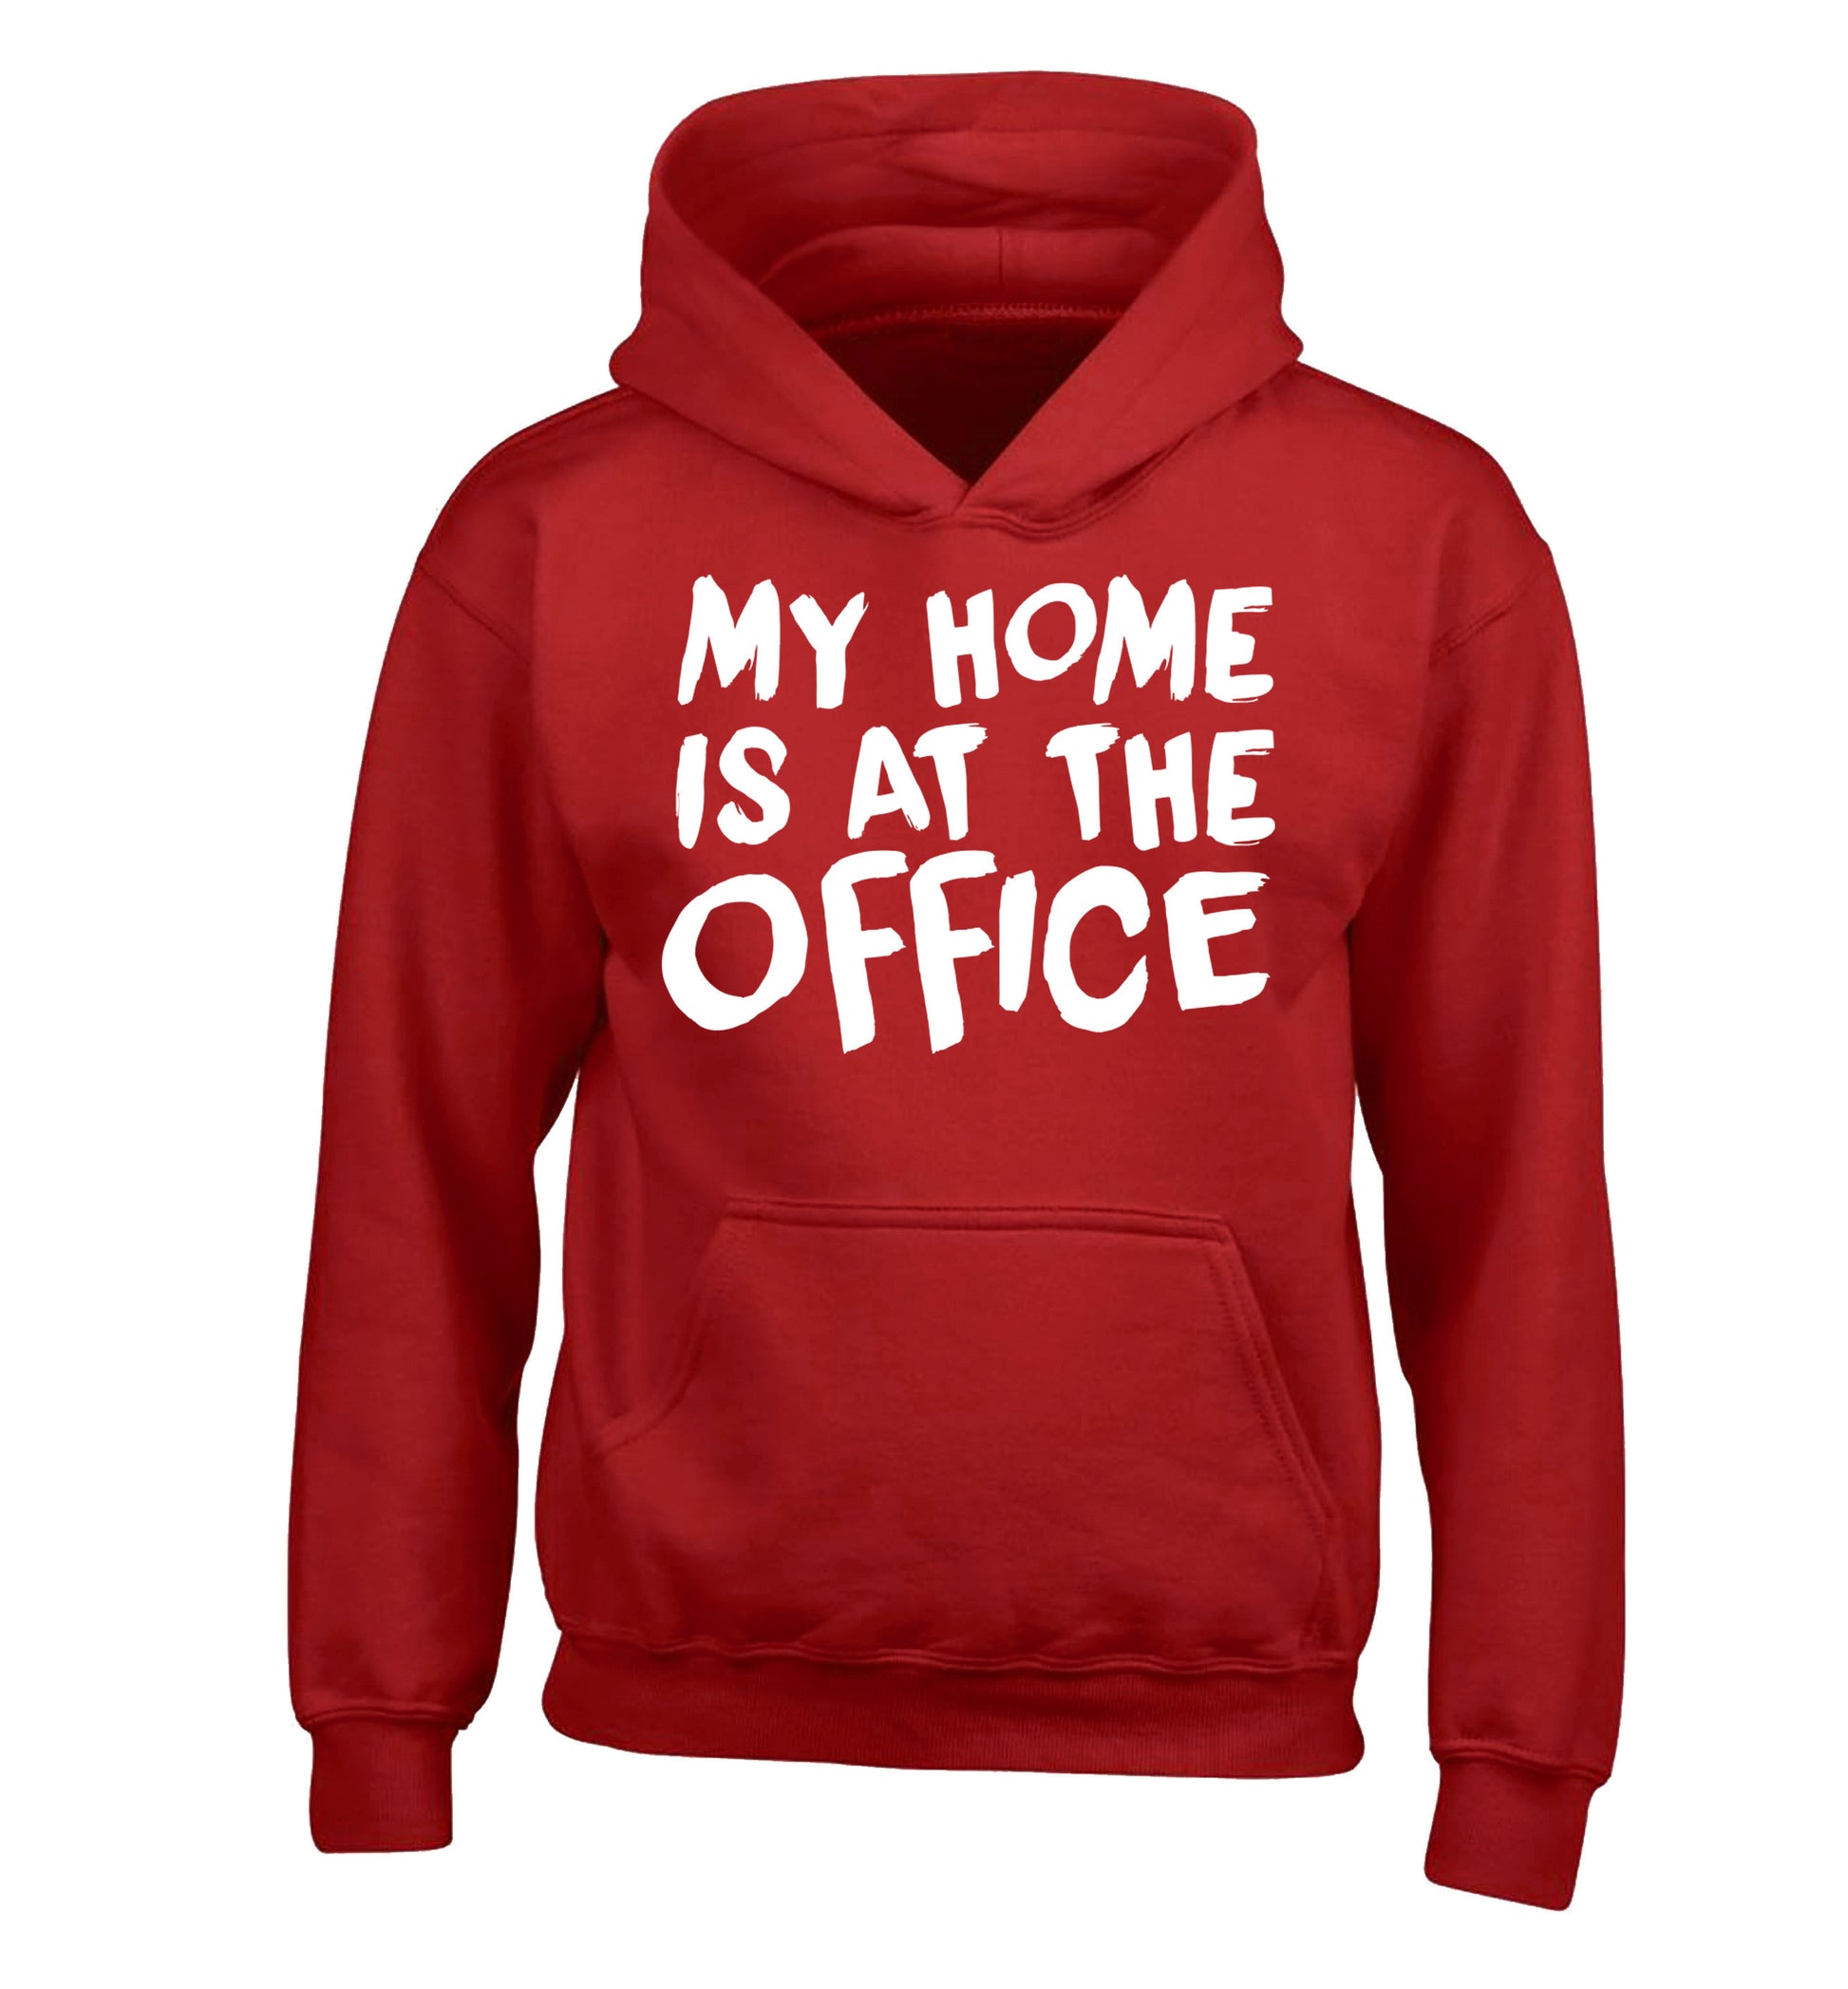 My home is at the office children's red hoodie 12-14 Years